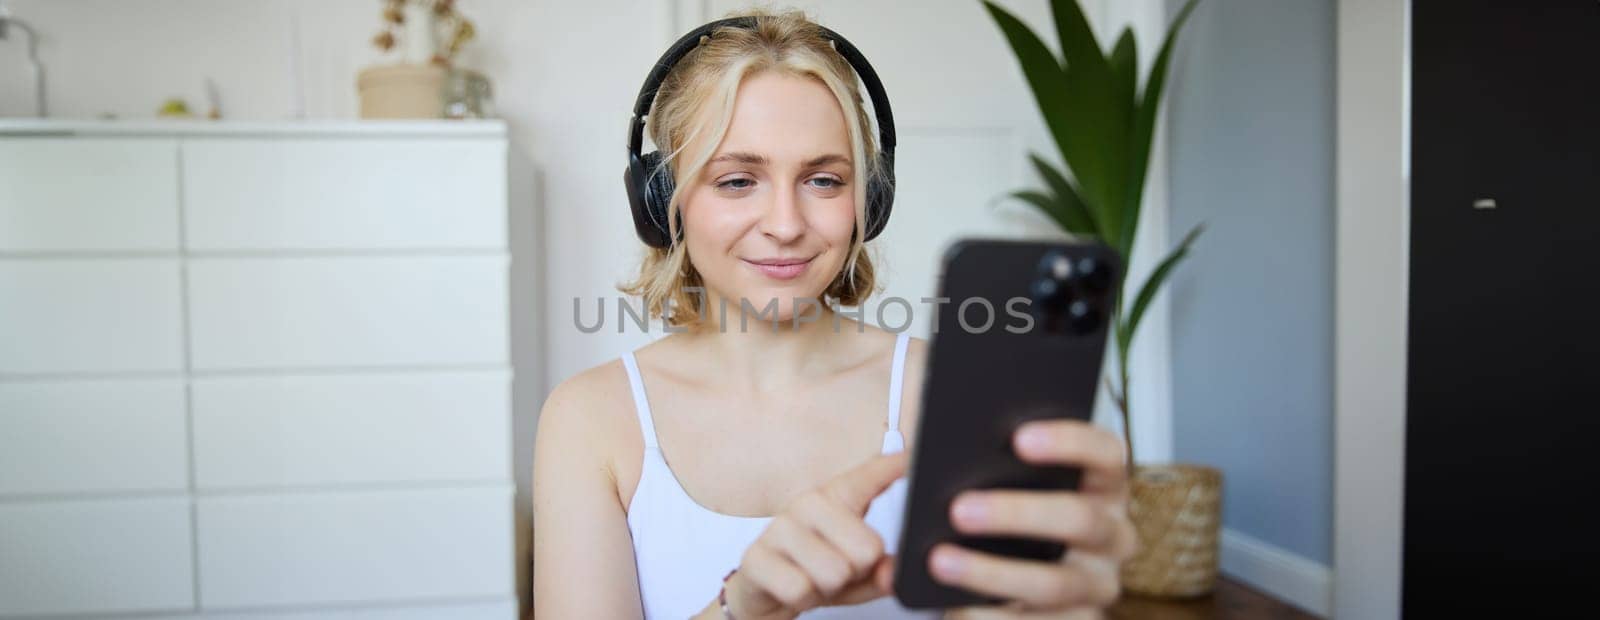 Close up portrait of smiling sporty woman, wearing headphones, using mobile phone, workout app while exercising at home. Wellbeing and lifestyle concept